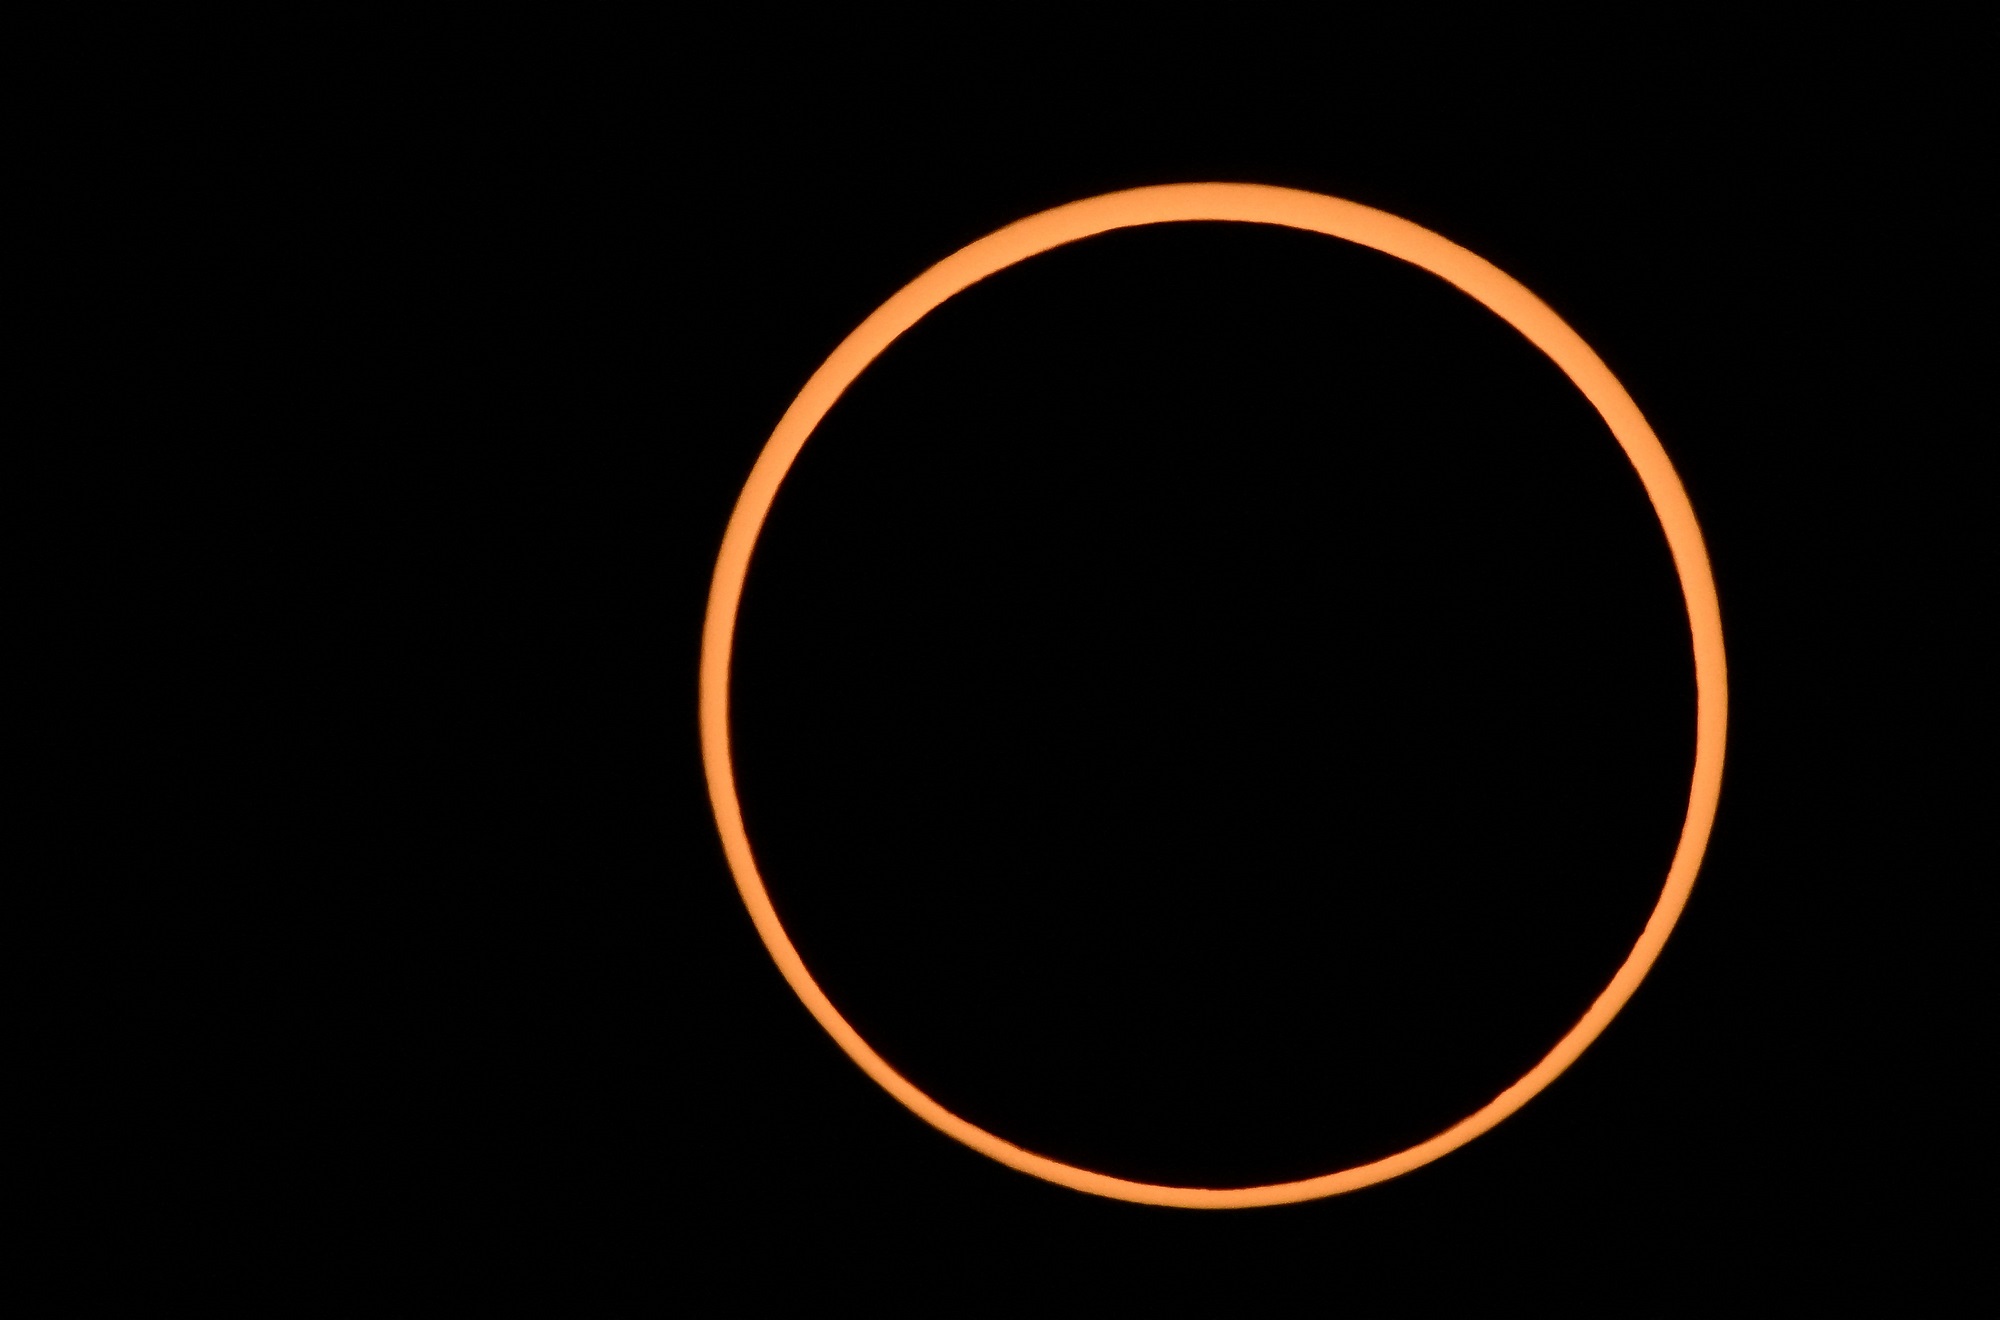 Annular solar eclipse of 2023 wows skywatchers with spectacular ‘ring of fire’ (photos, video) Space